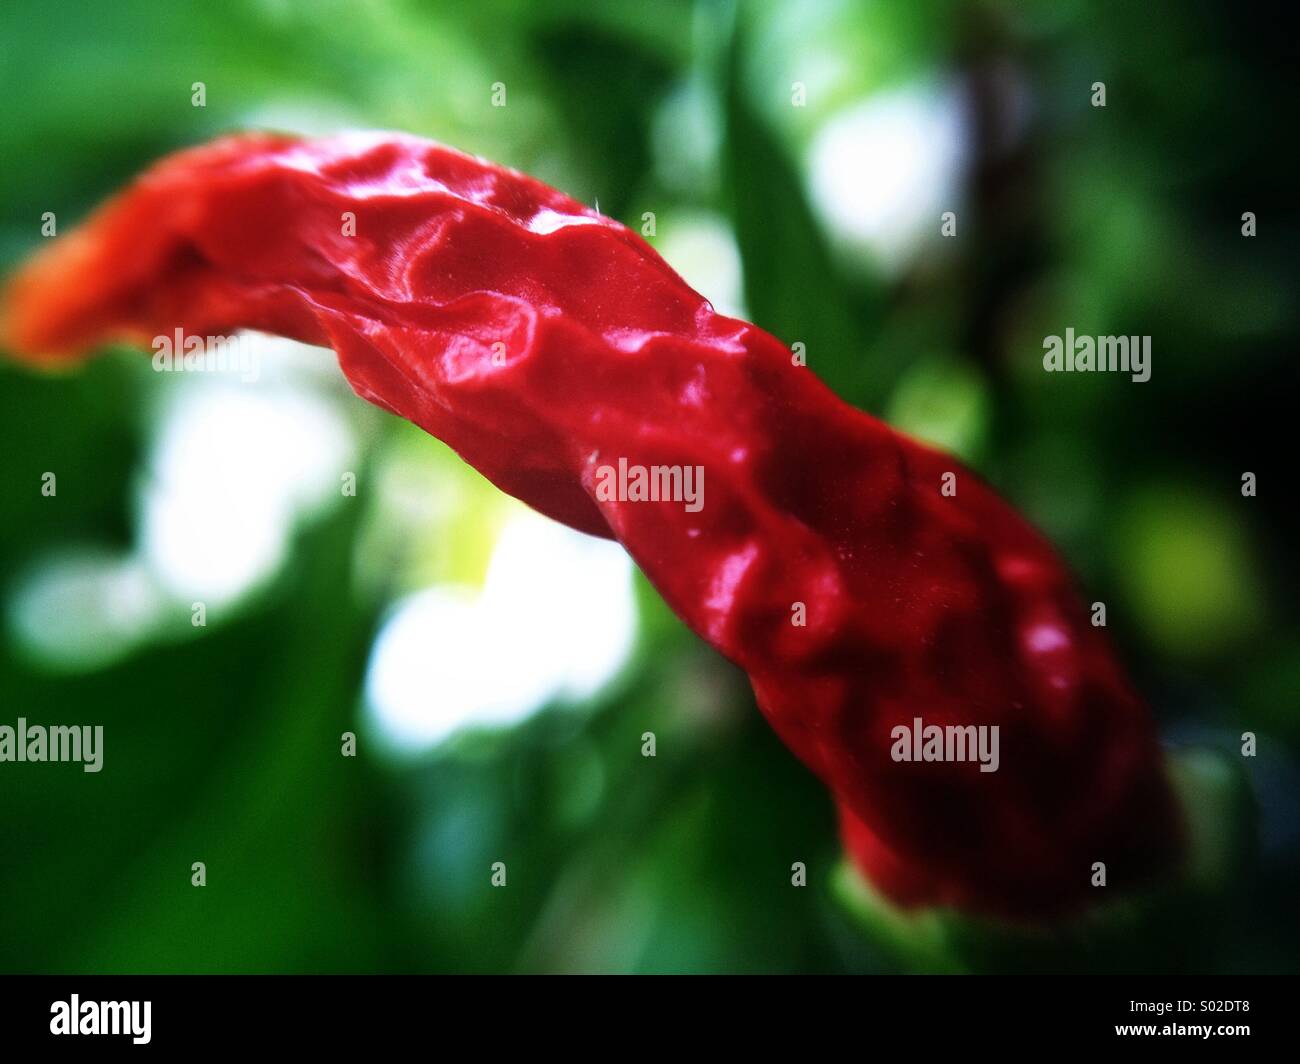 Red chili plant, close up Stock Photo